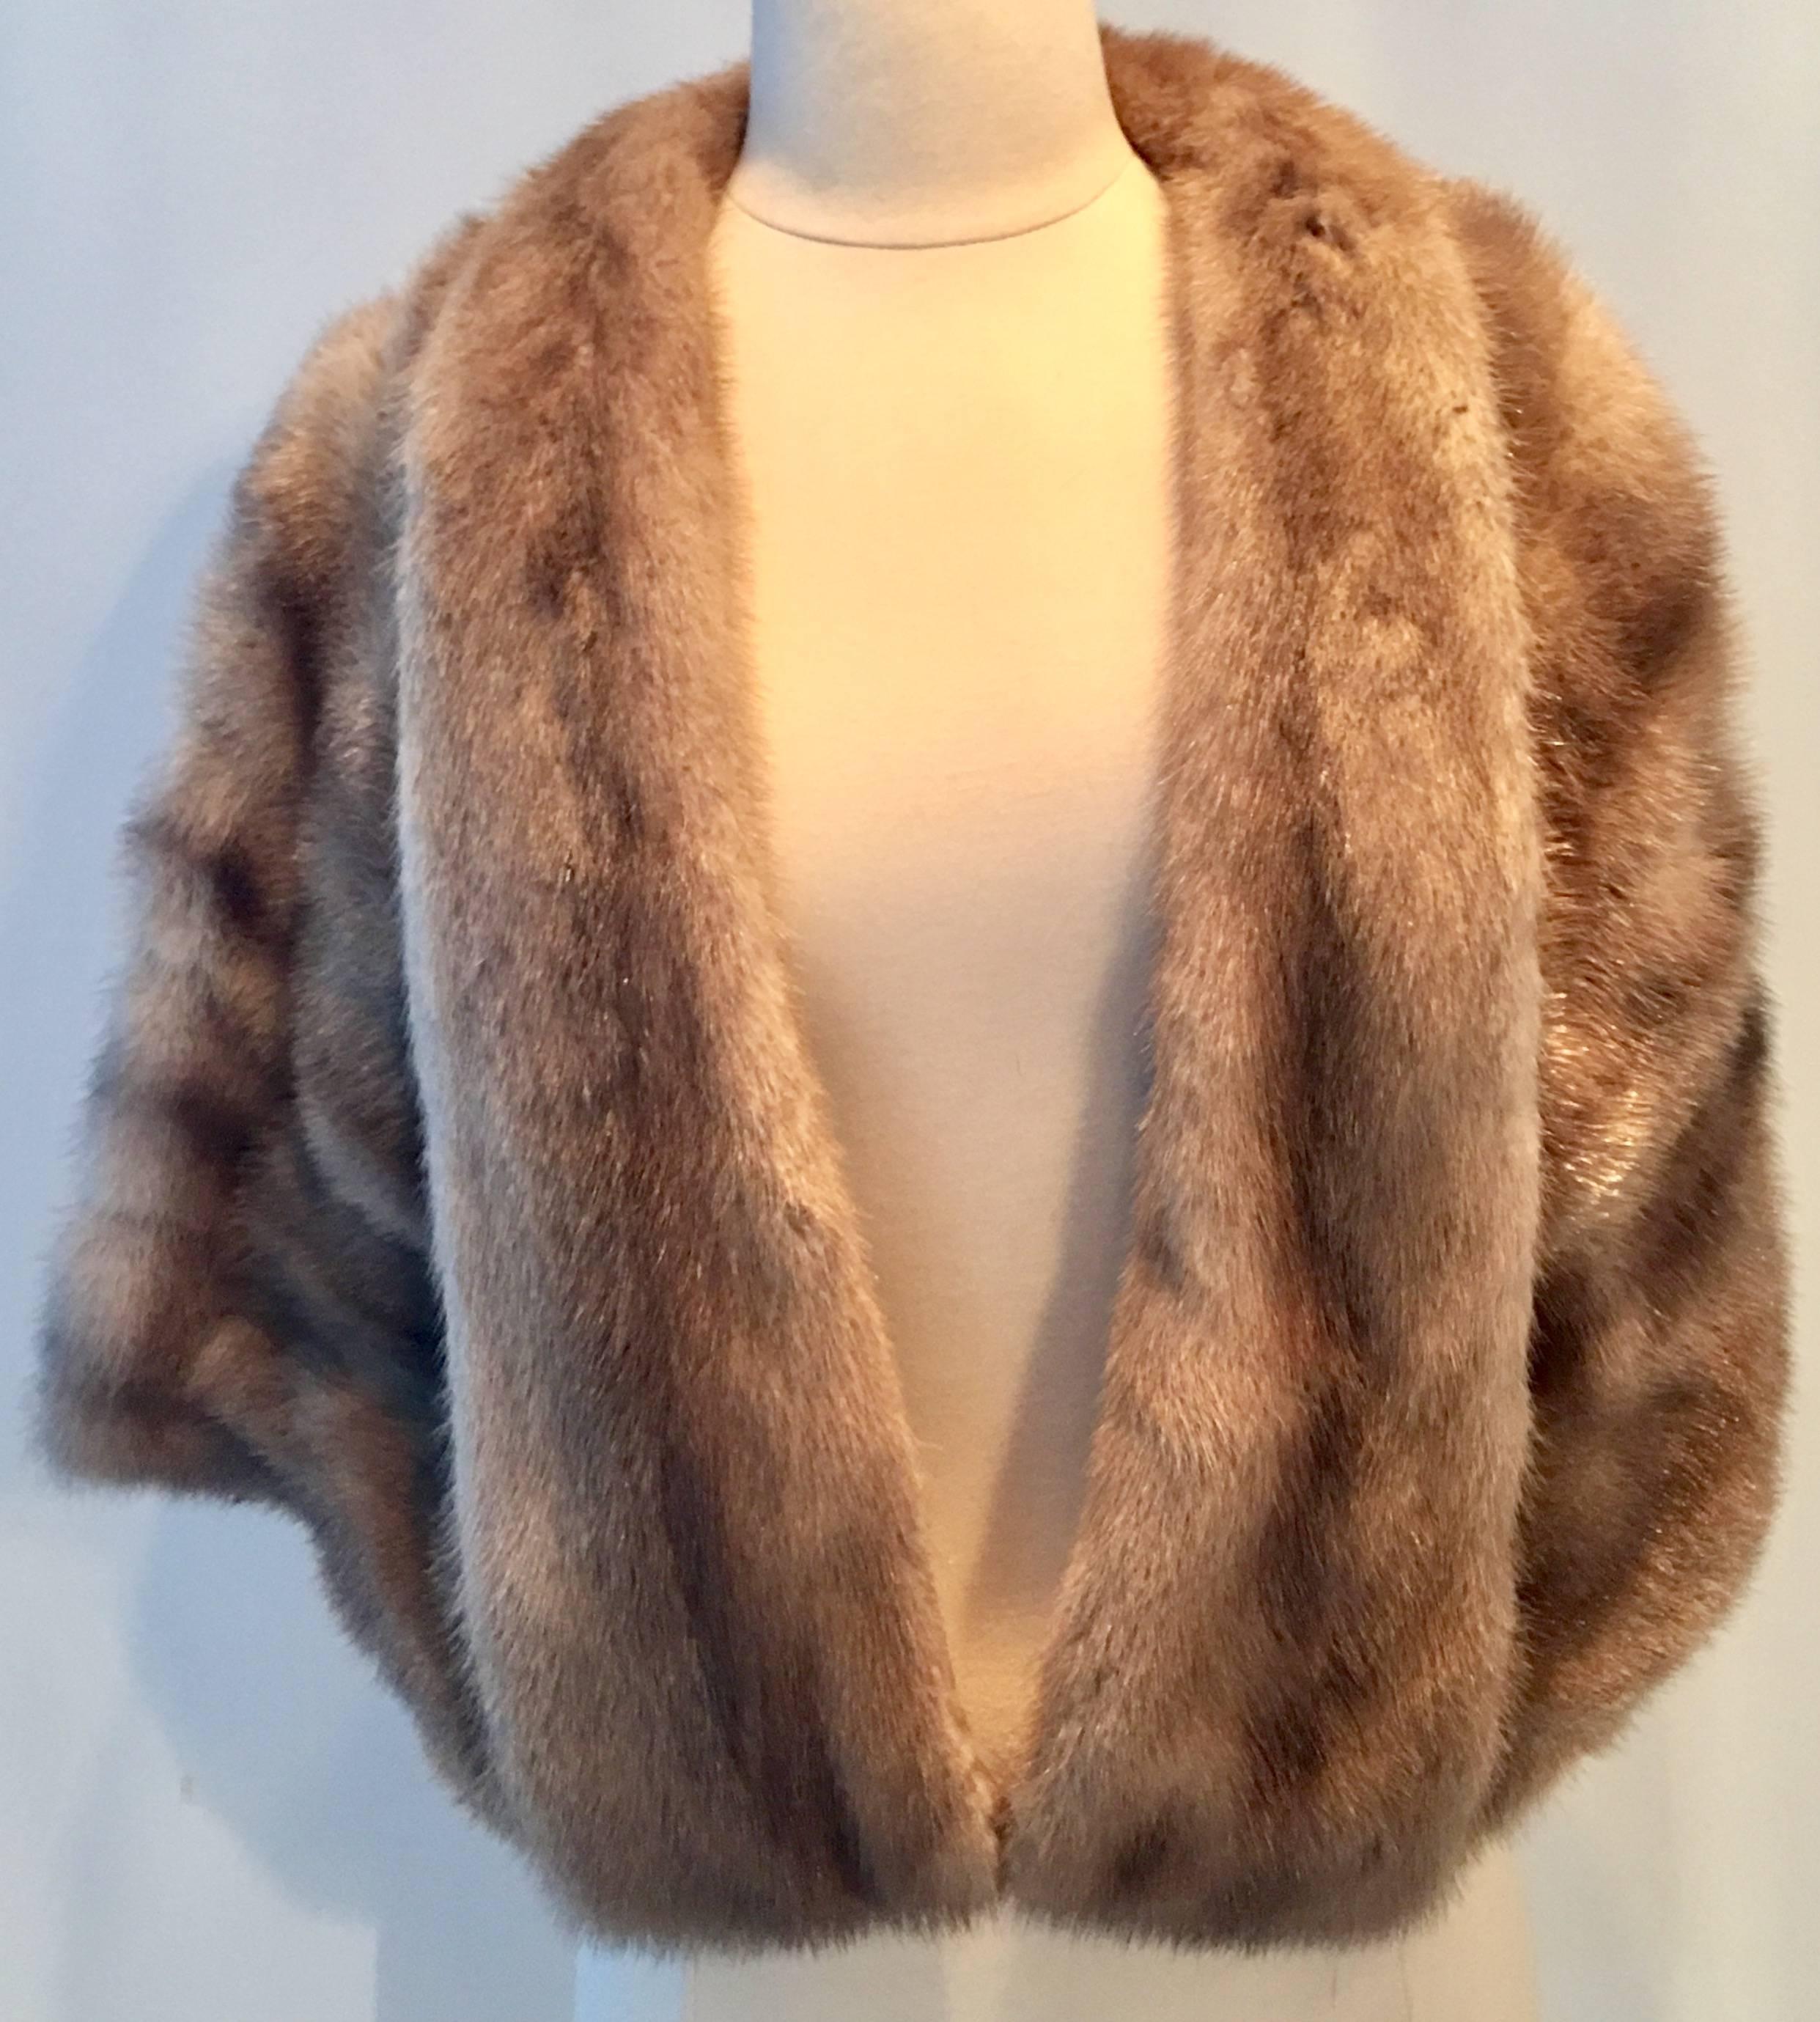 Mid-Century taupe and brown mink fur capelet jacket. Features shawl collar, fully lined. Furrier tag for Arnold Liebes San Francisco intact. Size - one size.